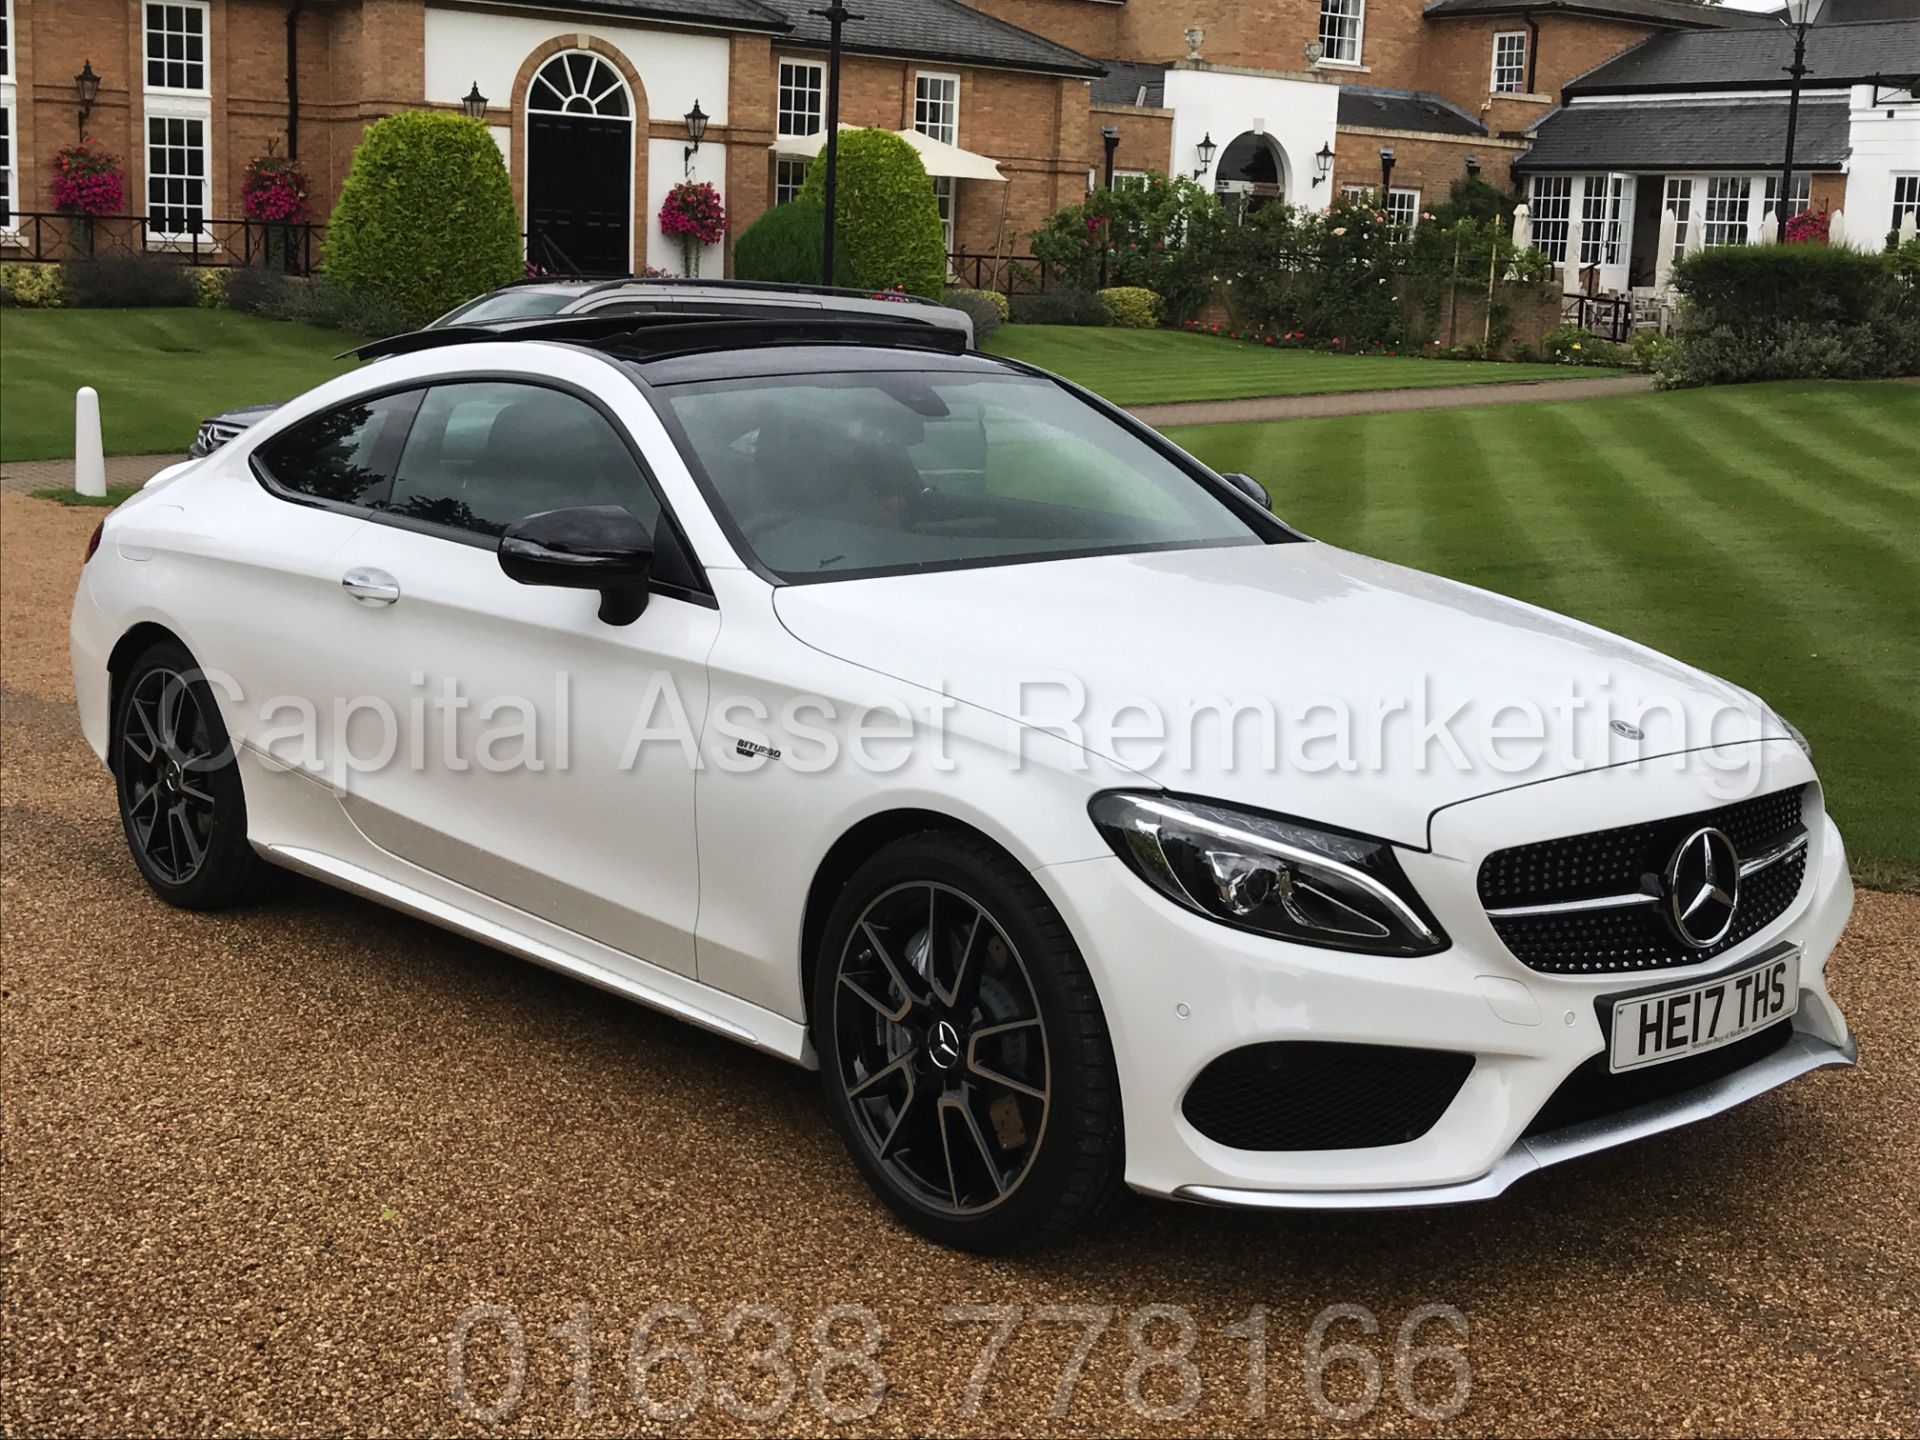 MEREDES-BENZ C43 AMG PREMIUM '4 MATIC' COUPE (2017) '9-G AUTO - LEATHER - SAT NAV' **FULLY LOADED** - Image 2 of 57